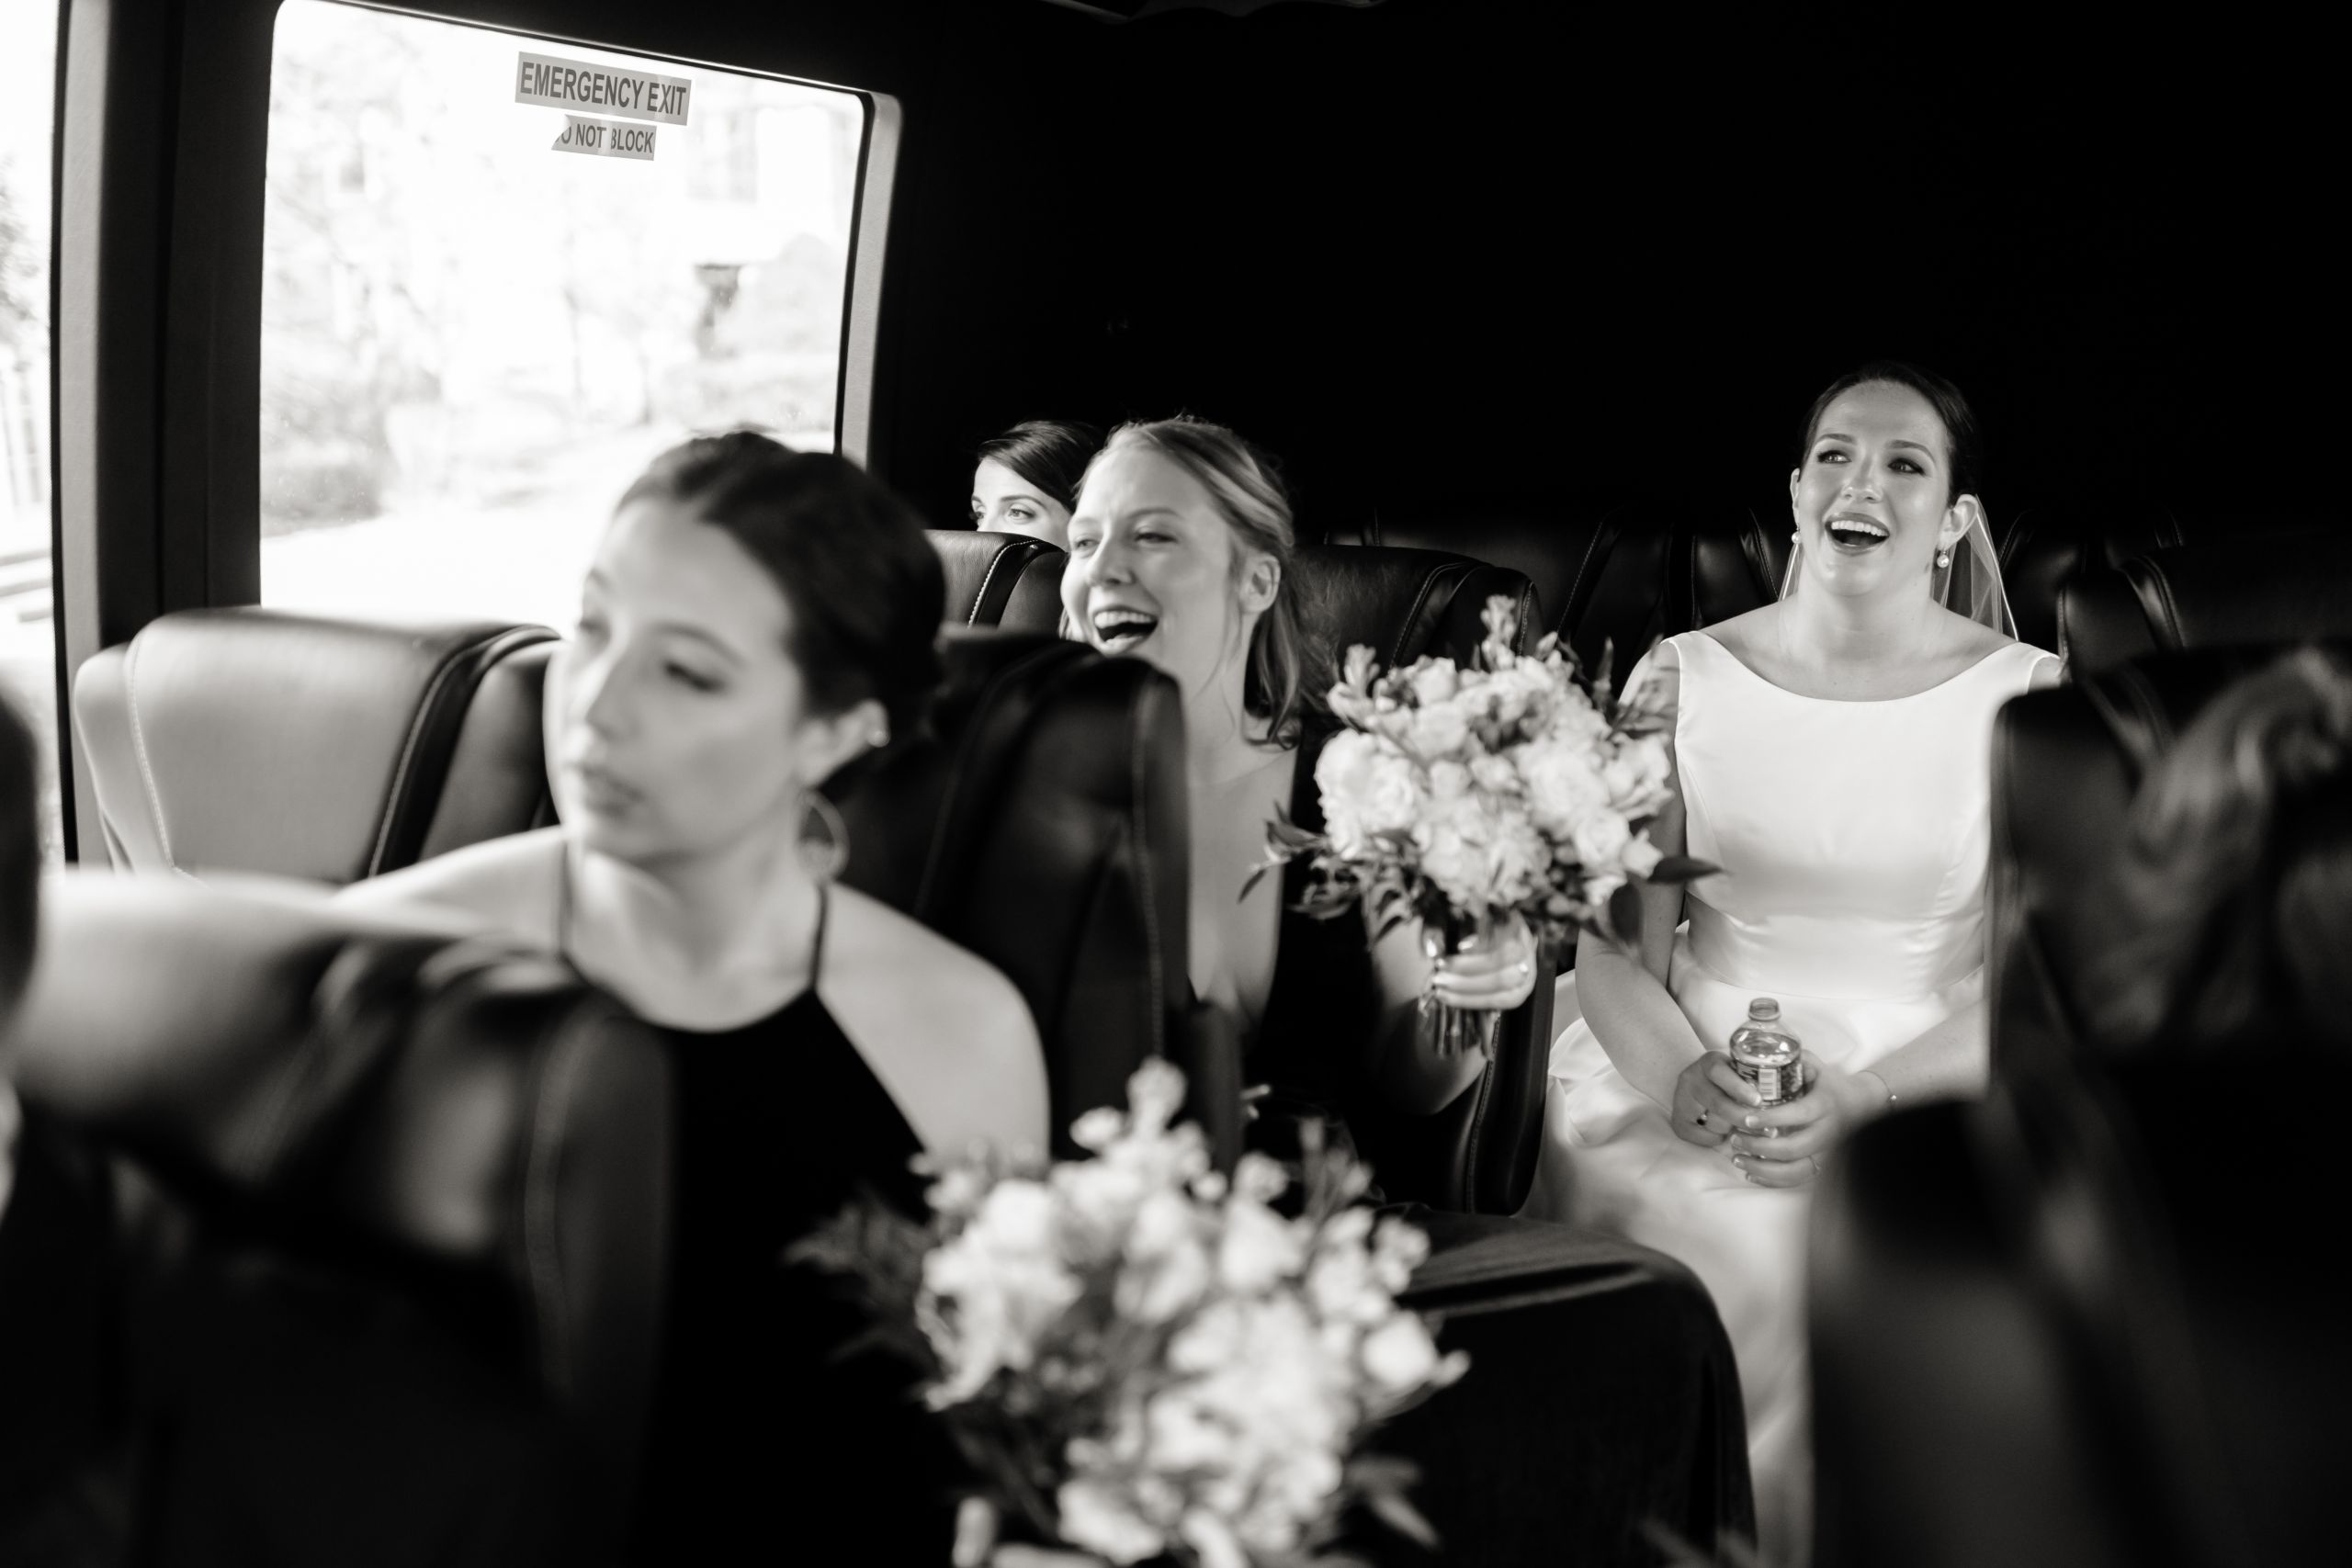 Wedding party on a bus